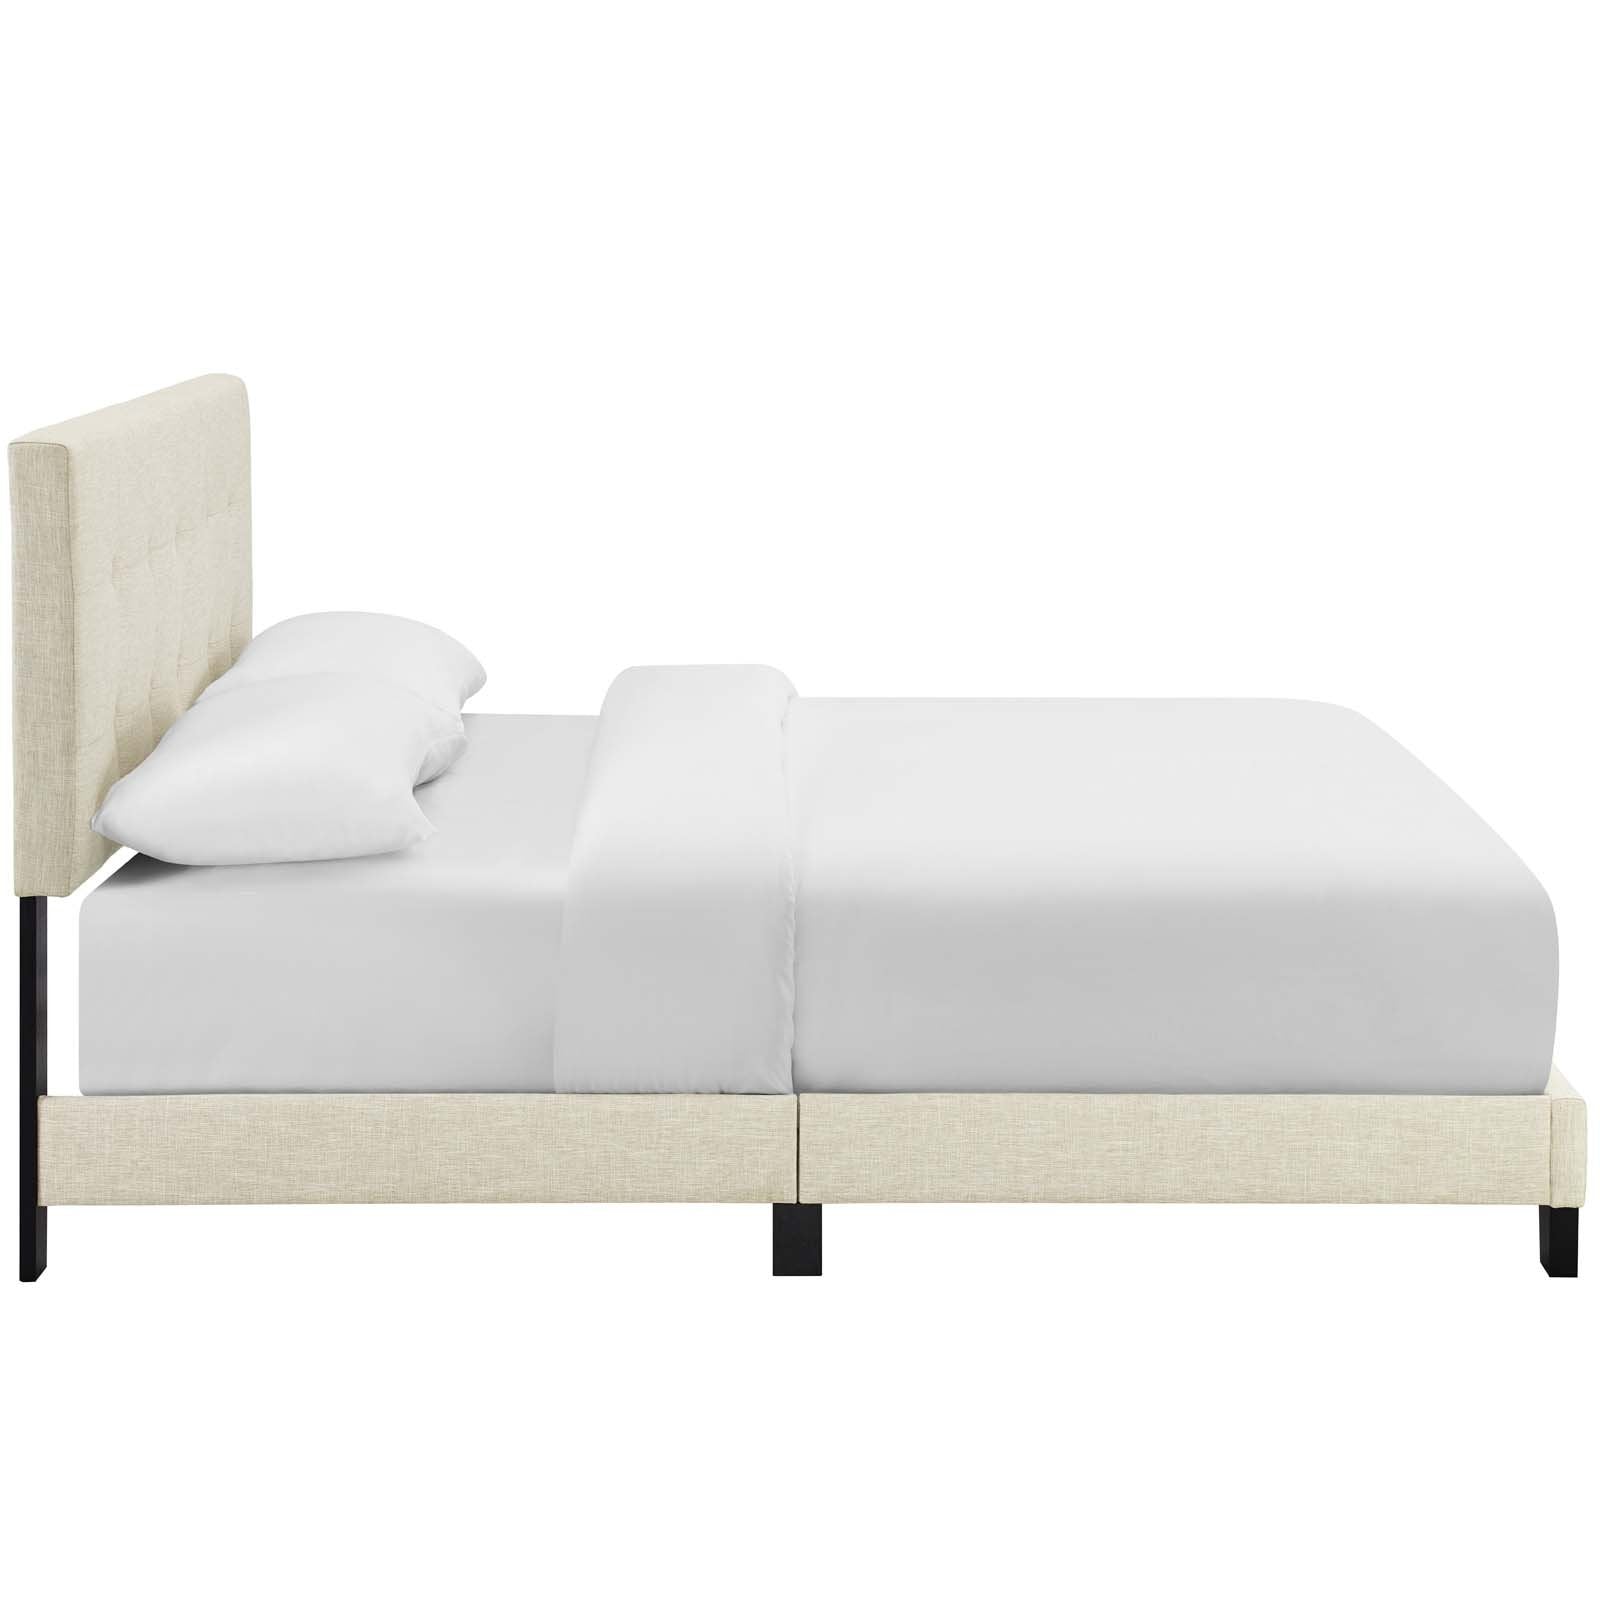 Amira Upholstered Fabric Bed - East Shore Modern Home Furnishings